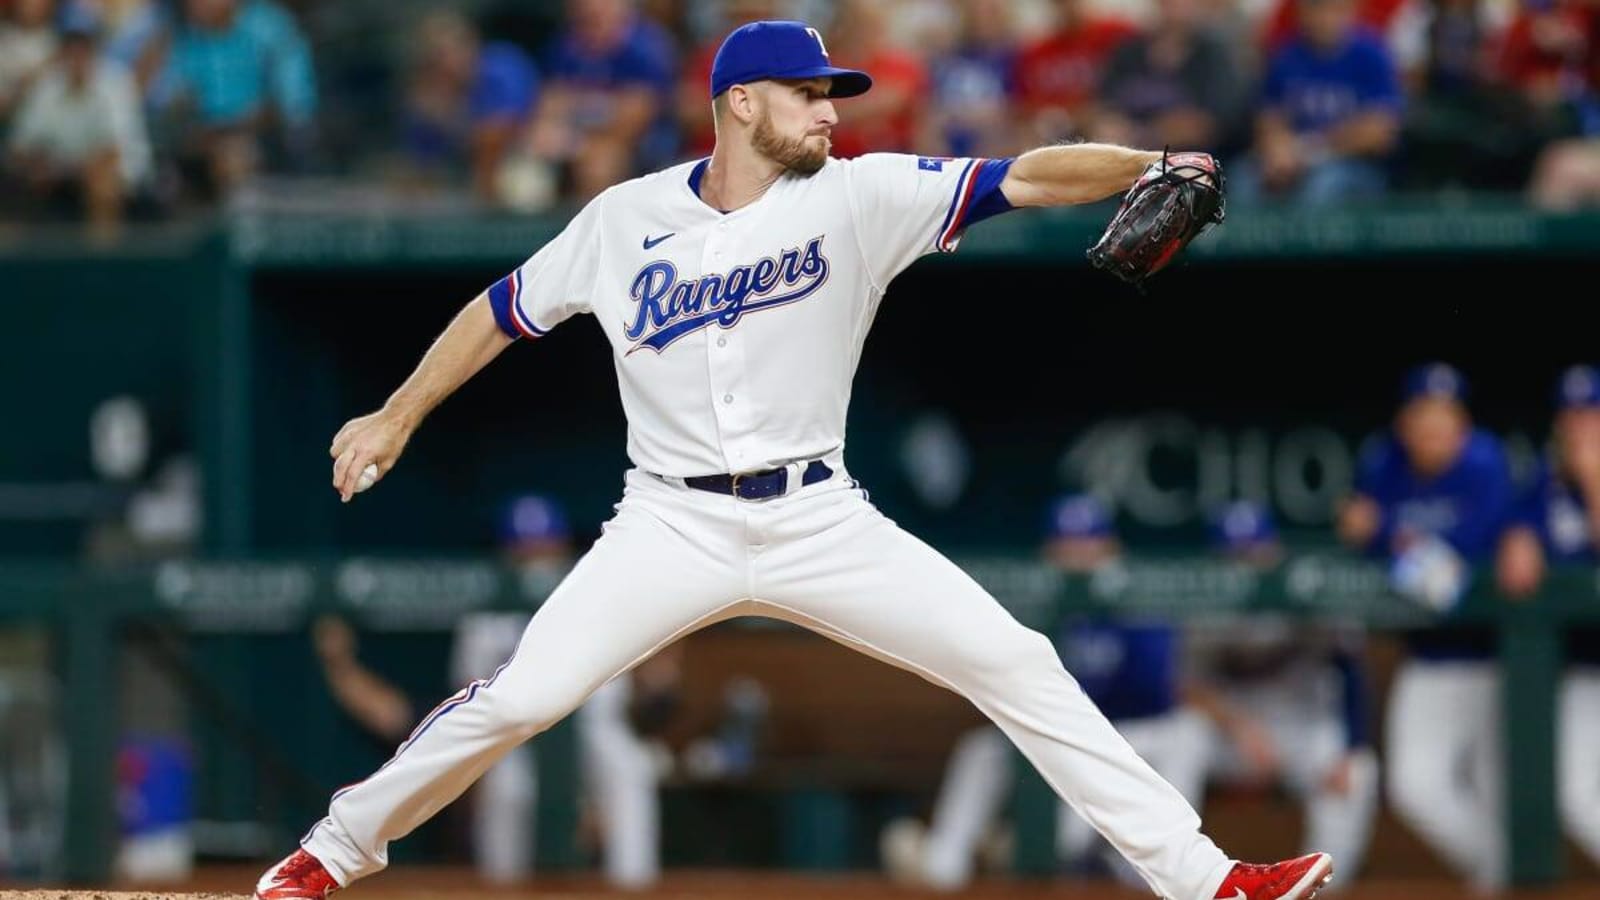 New Rangers Reliever Up for Any Role